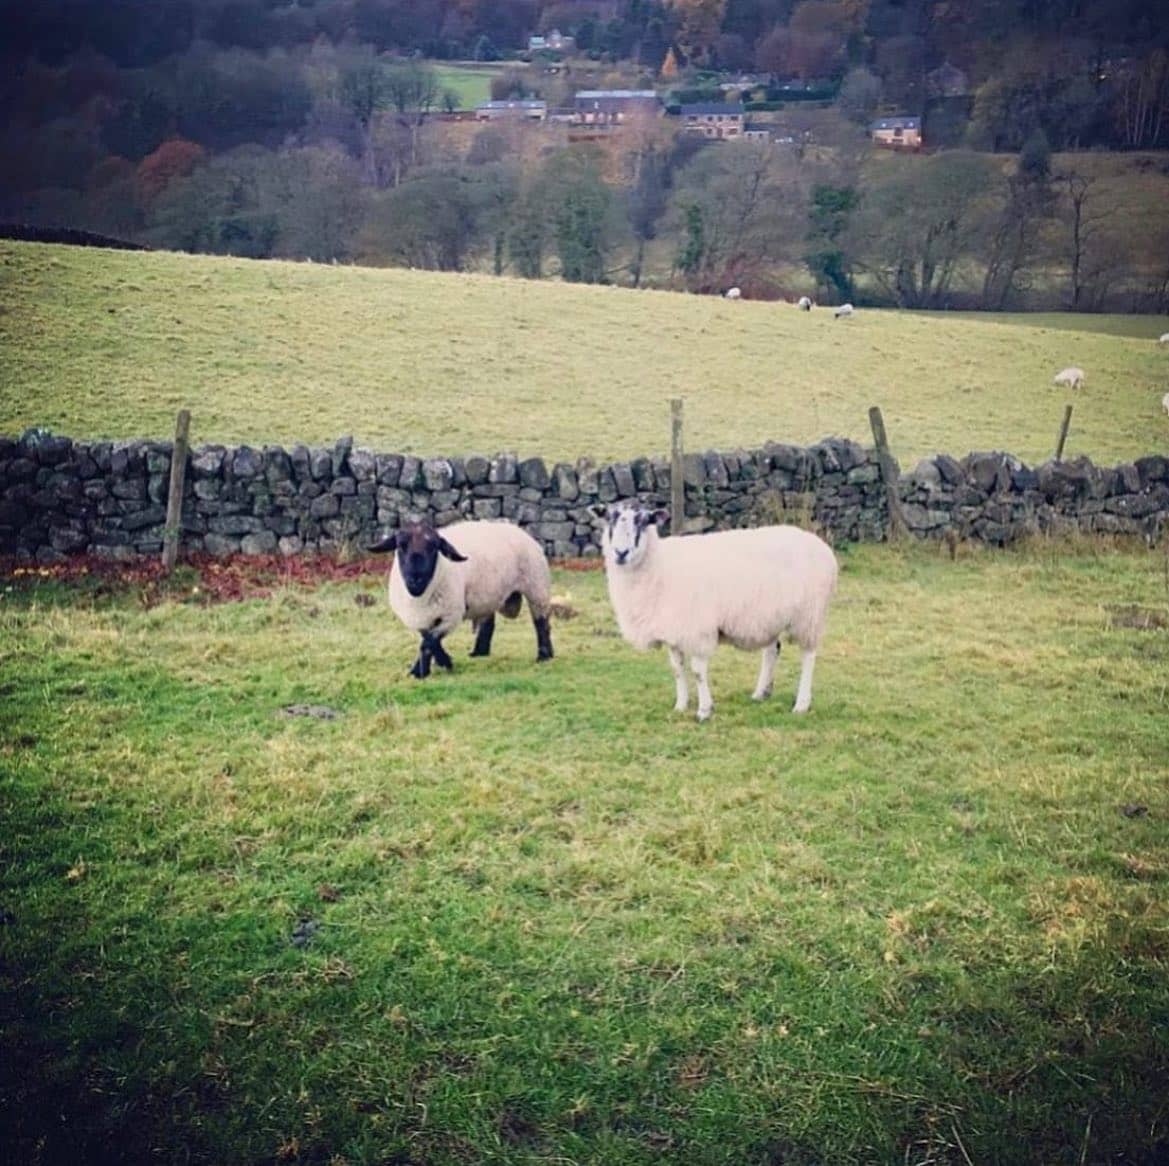 🐑 Wildlife Wednesday 🐑

We love seeing all kinds of four legged friends out and about, they’re ju...